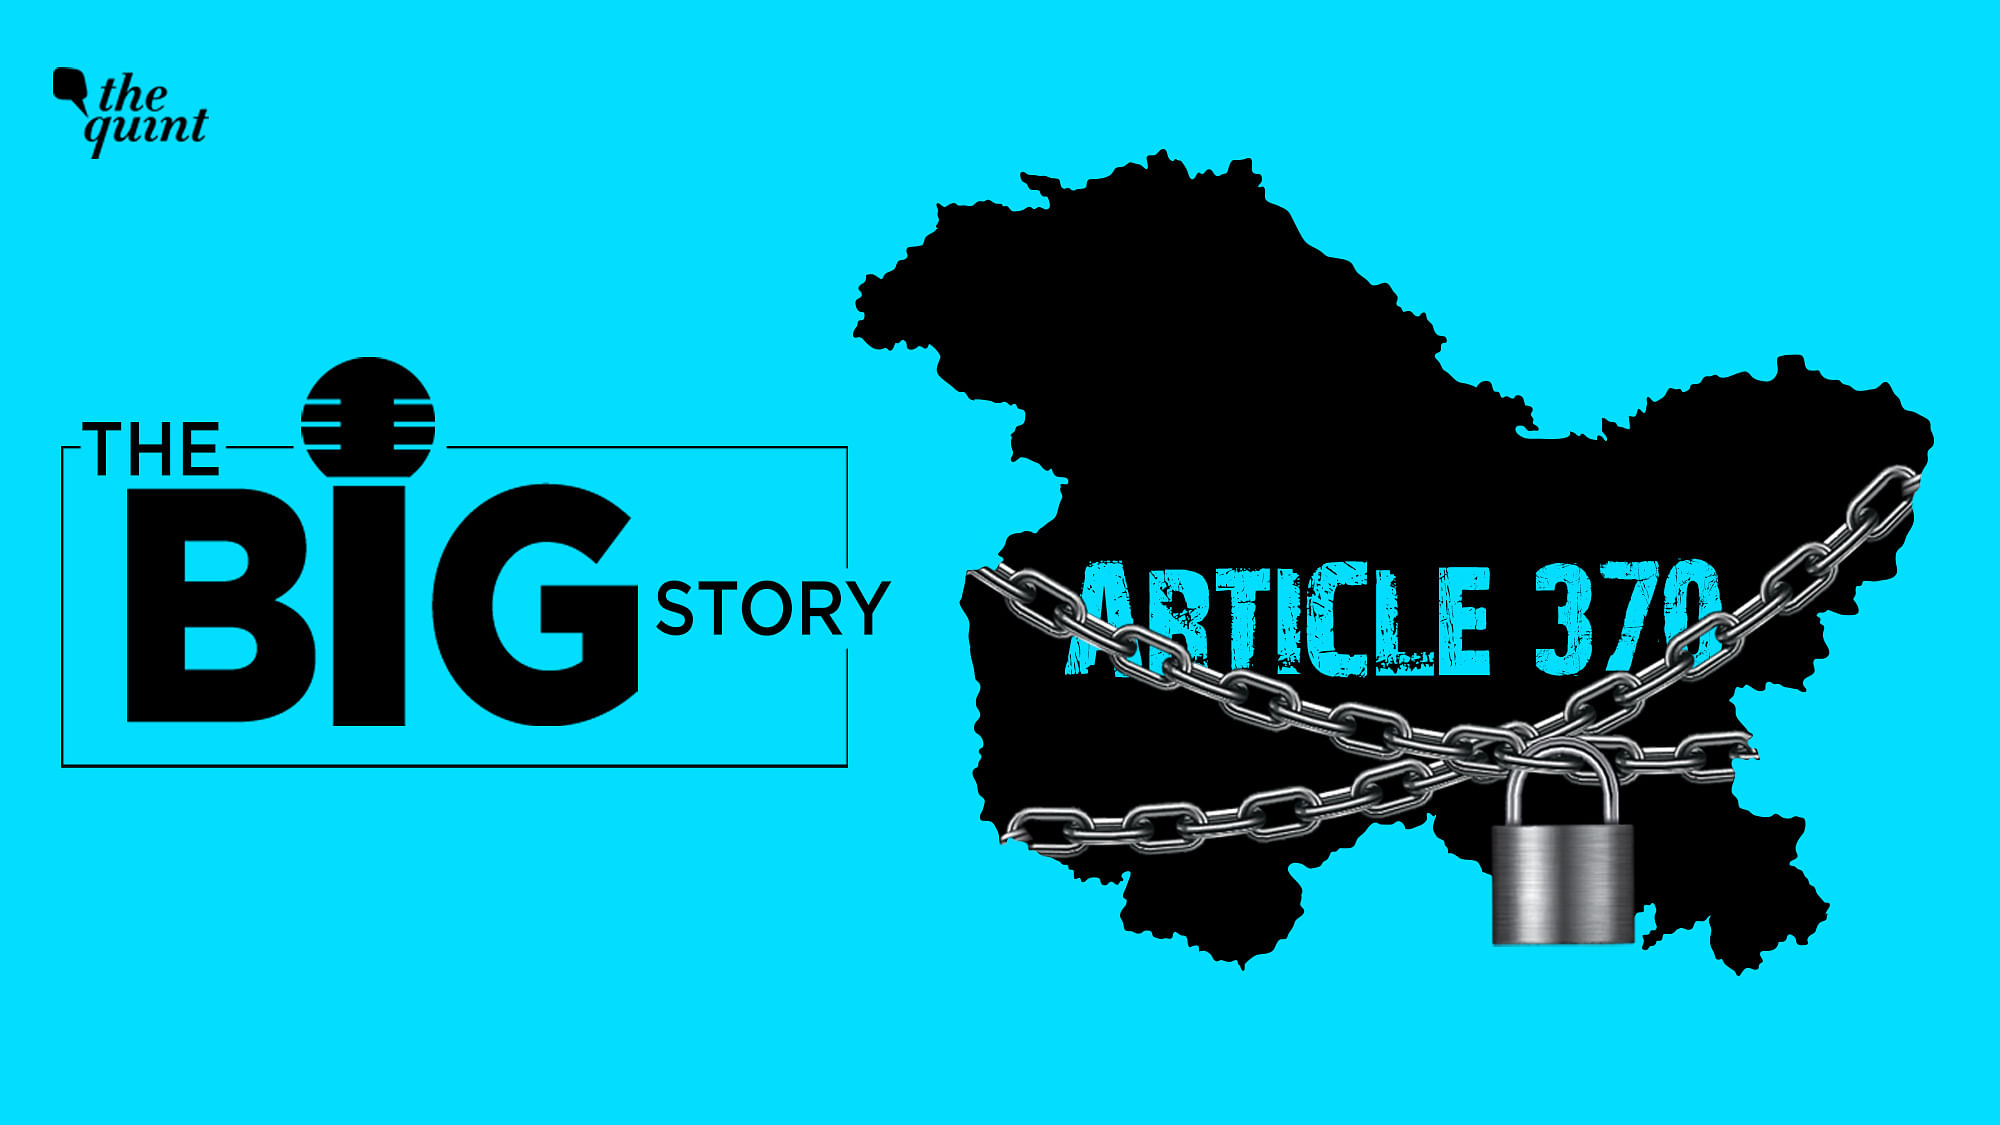 A month has passed since the Centre abrogated Article 370 and Article 35A of the Constitution.